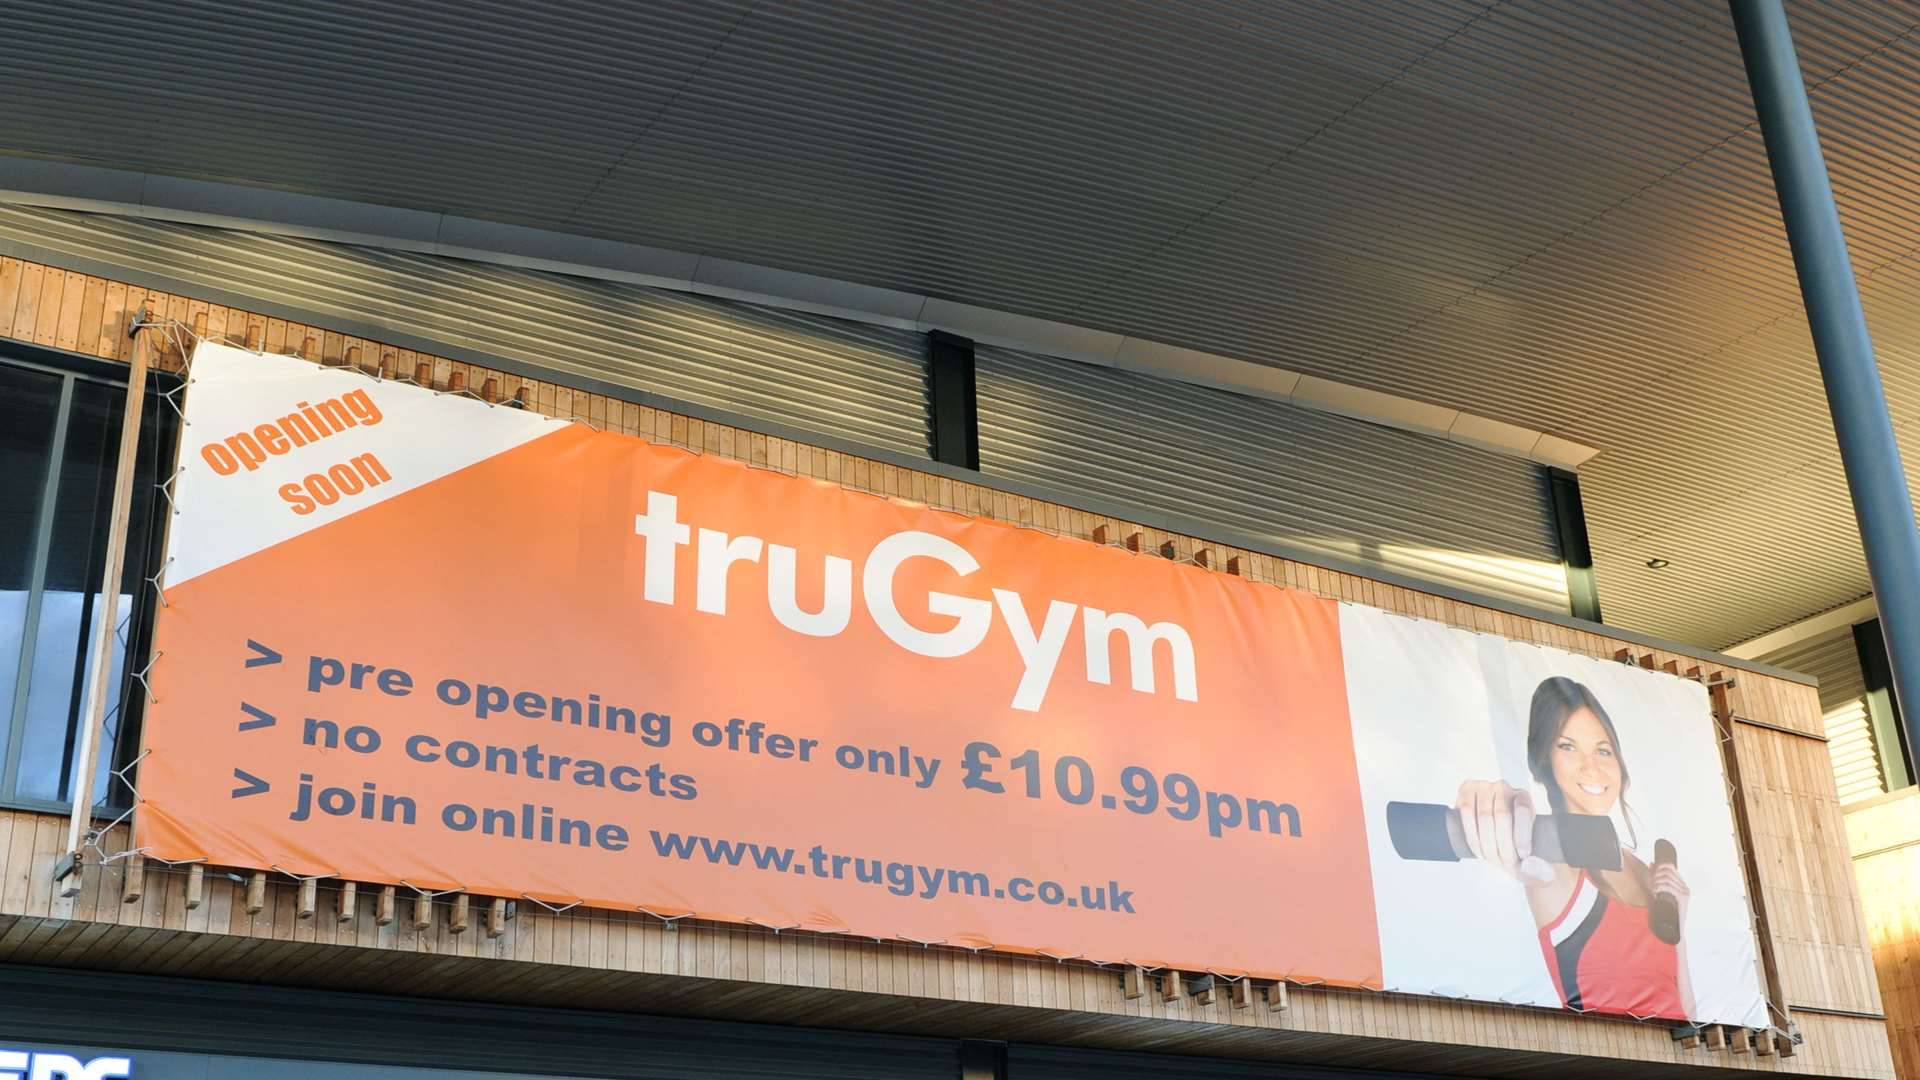 TruGym will open on April 20.